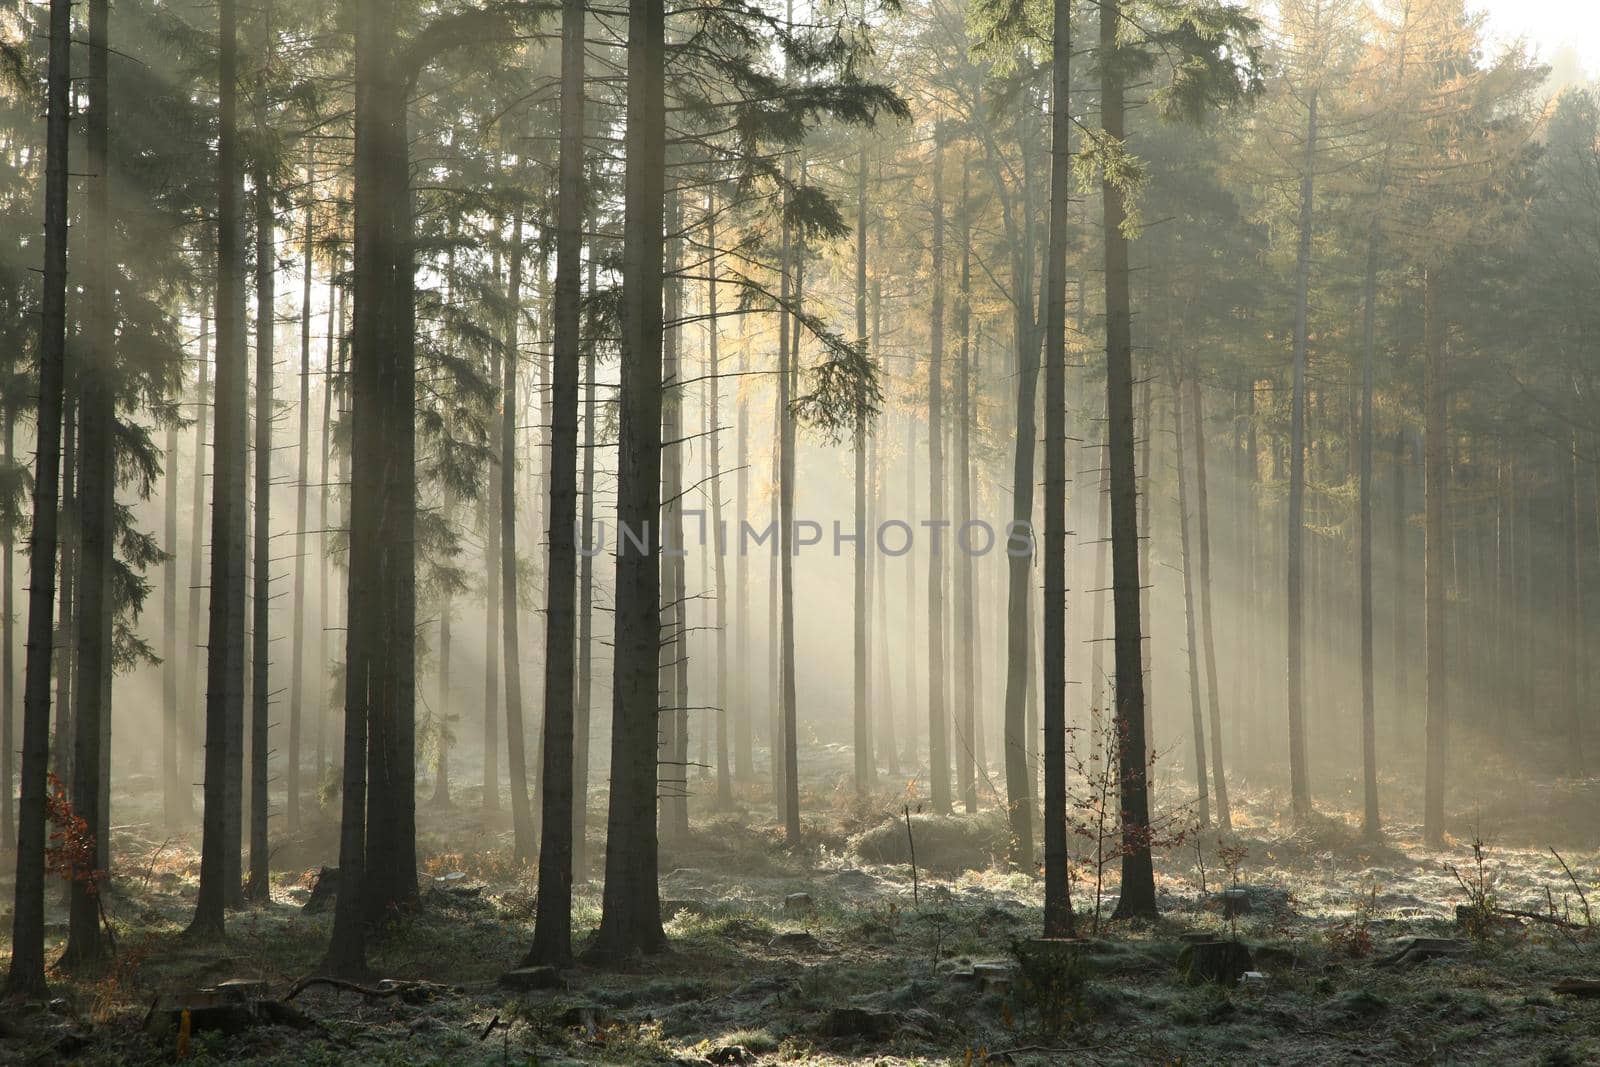 Picturesque autumnal forest on a foggy morning.